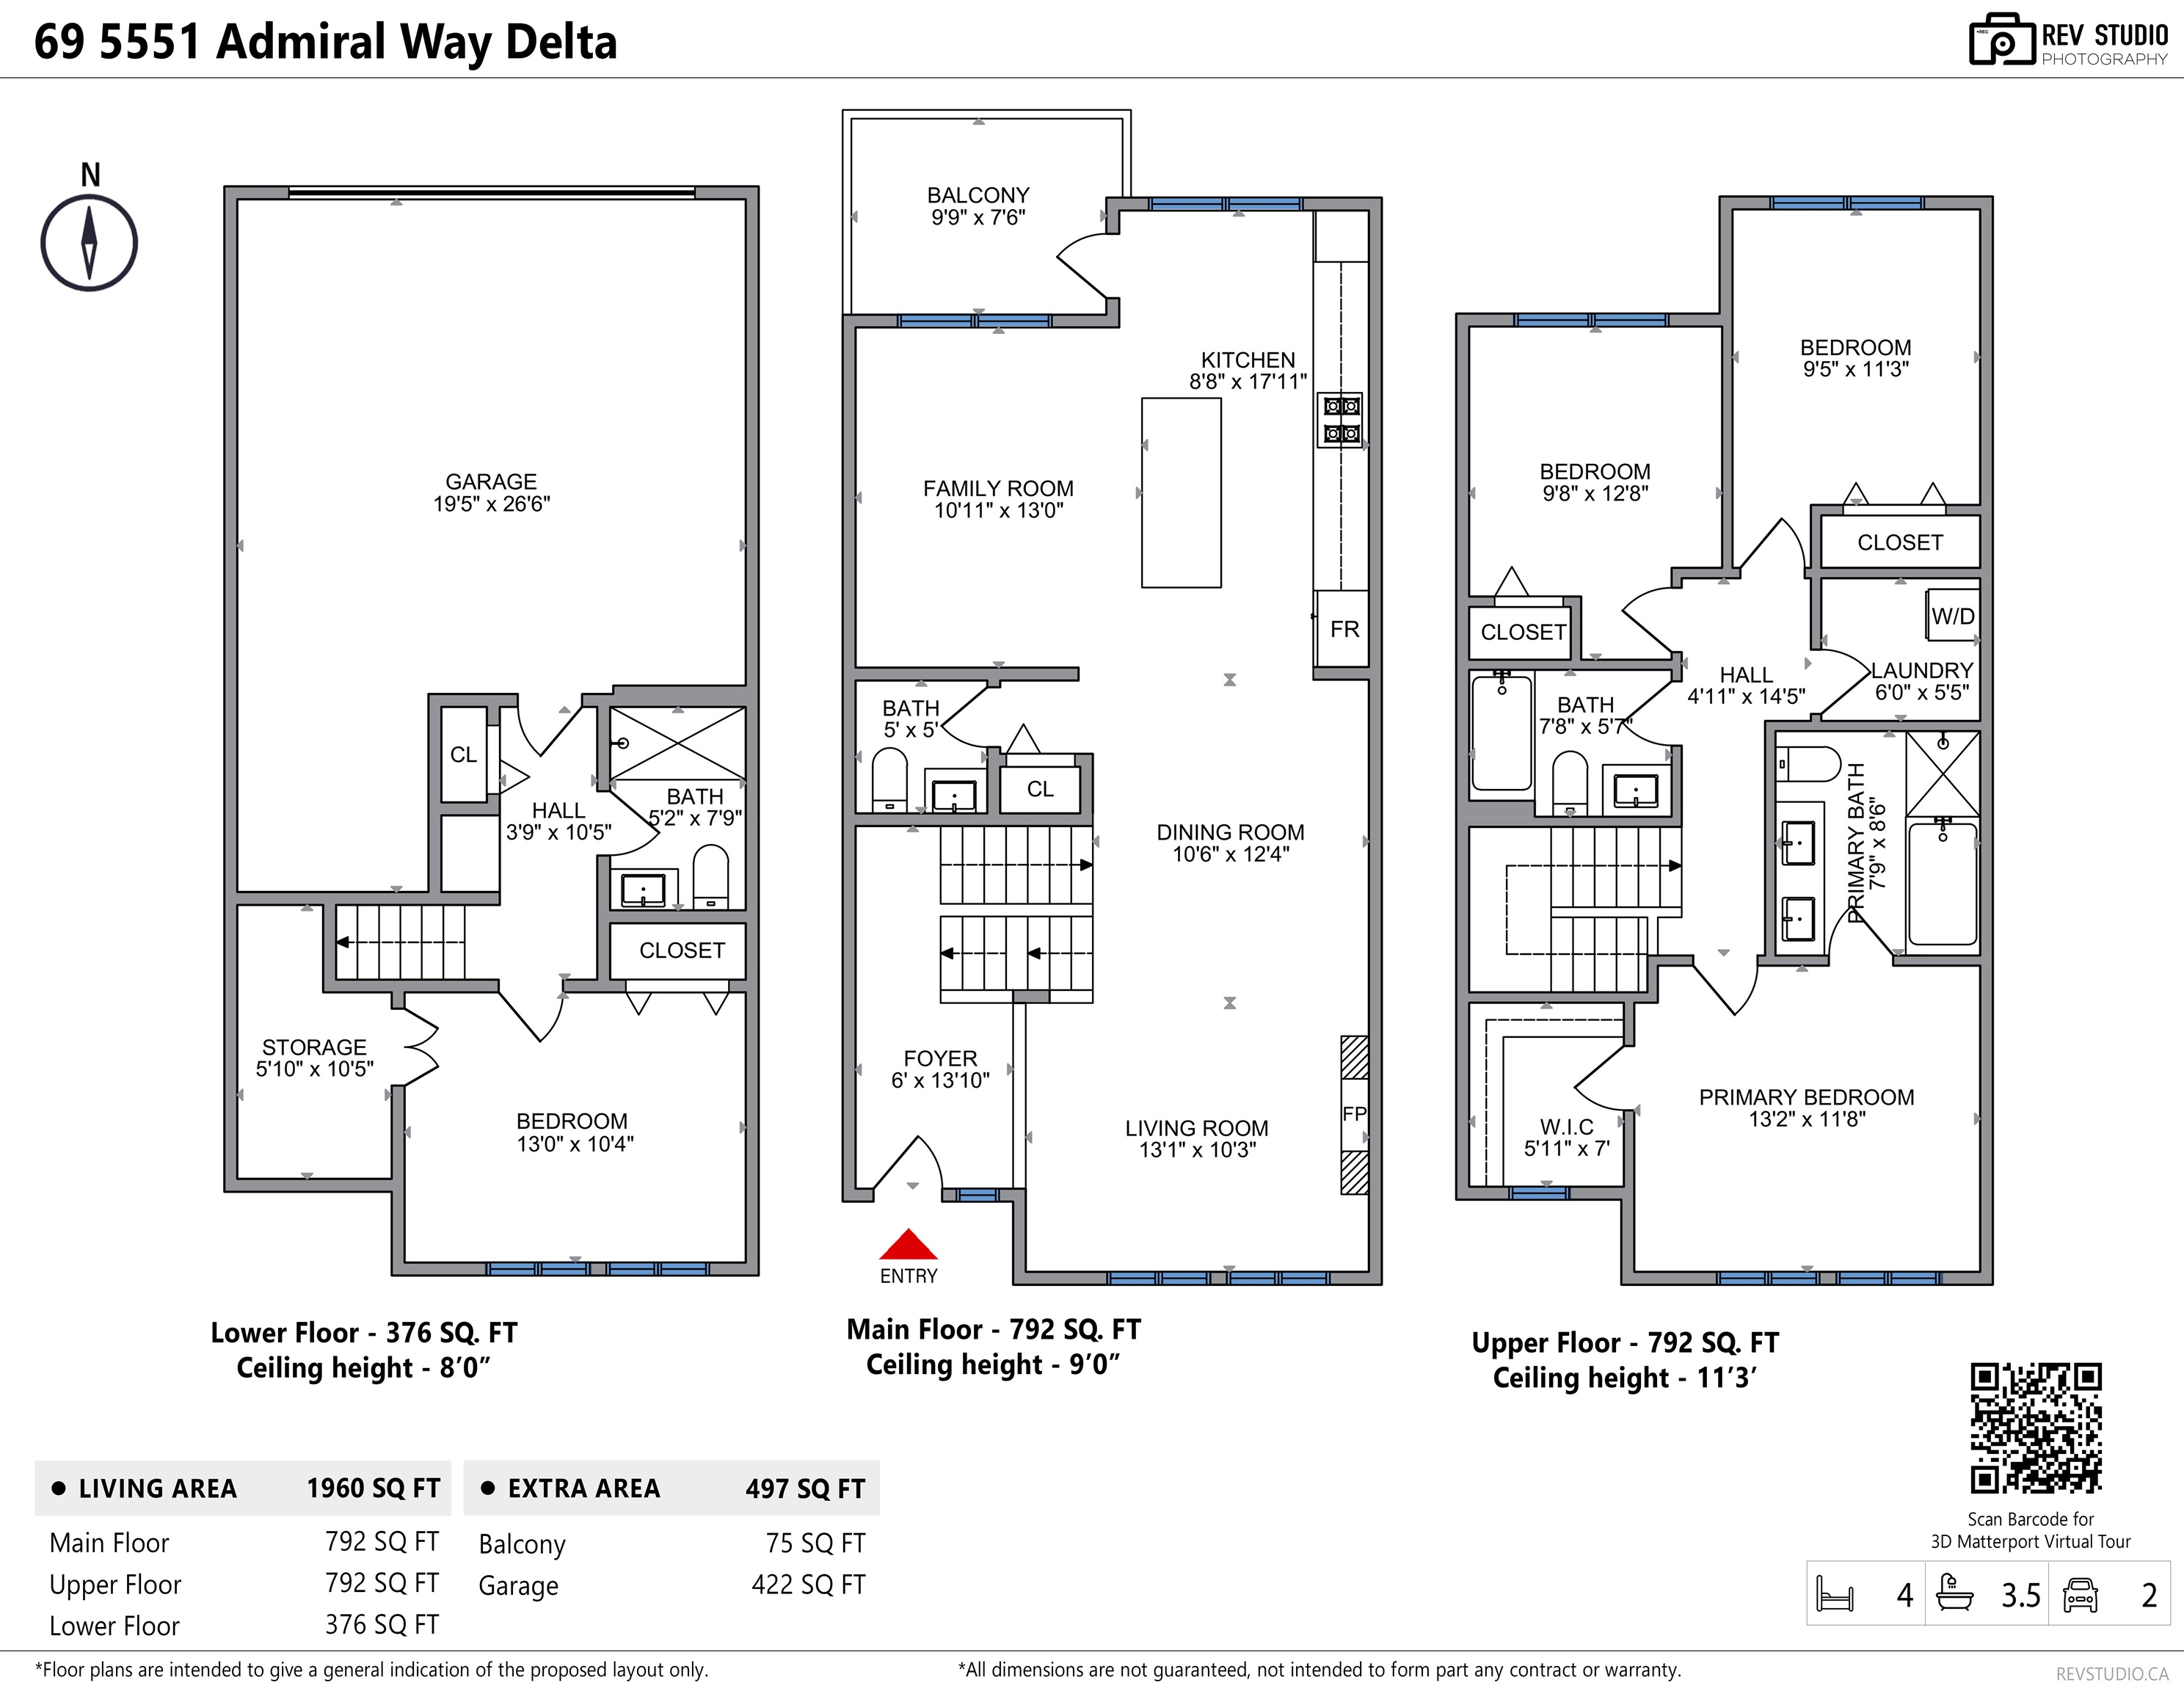 Listing image of 69 5551 ADMIRAL WAY